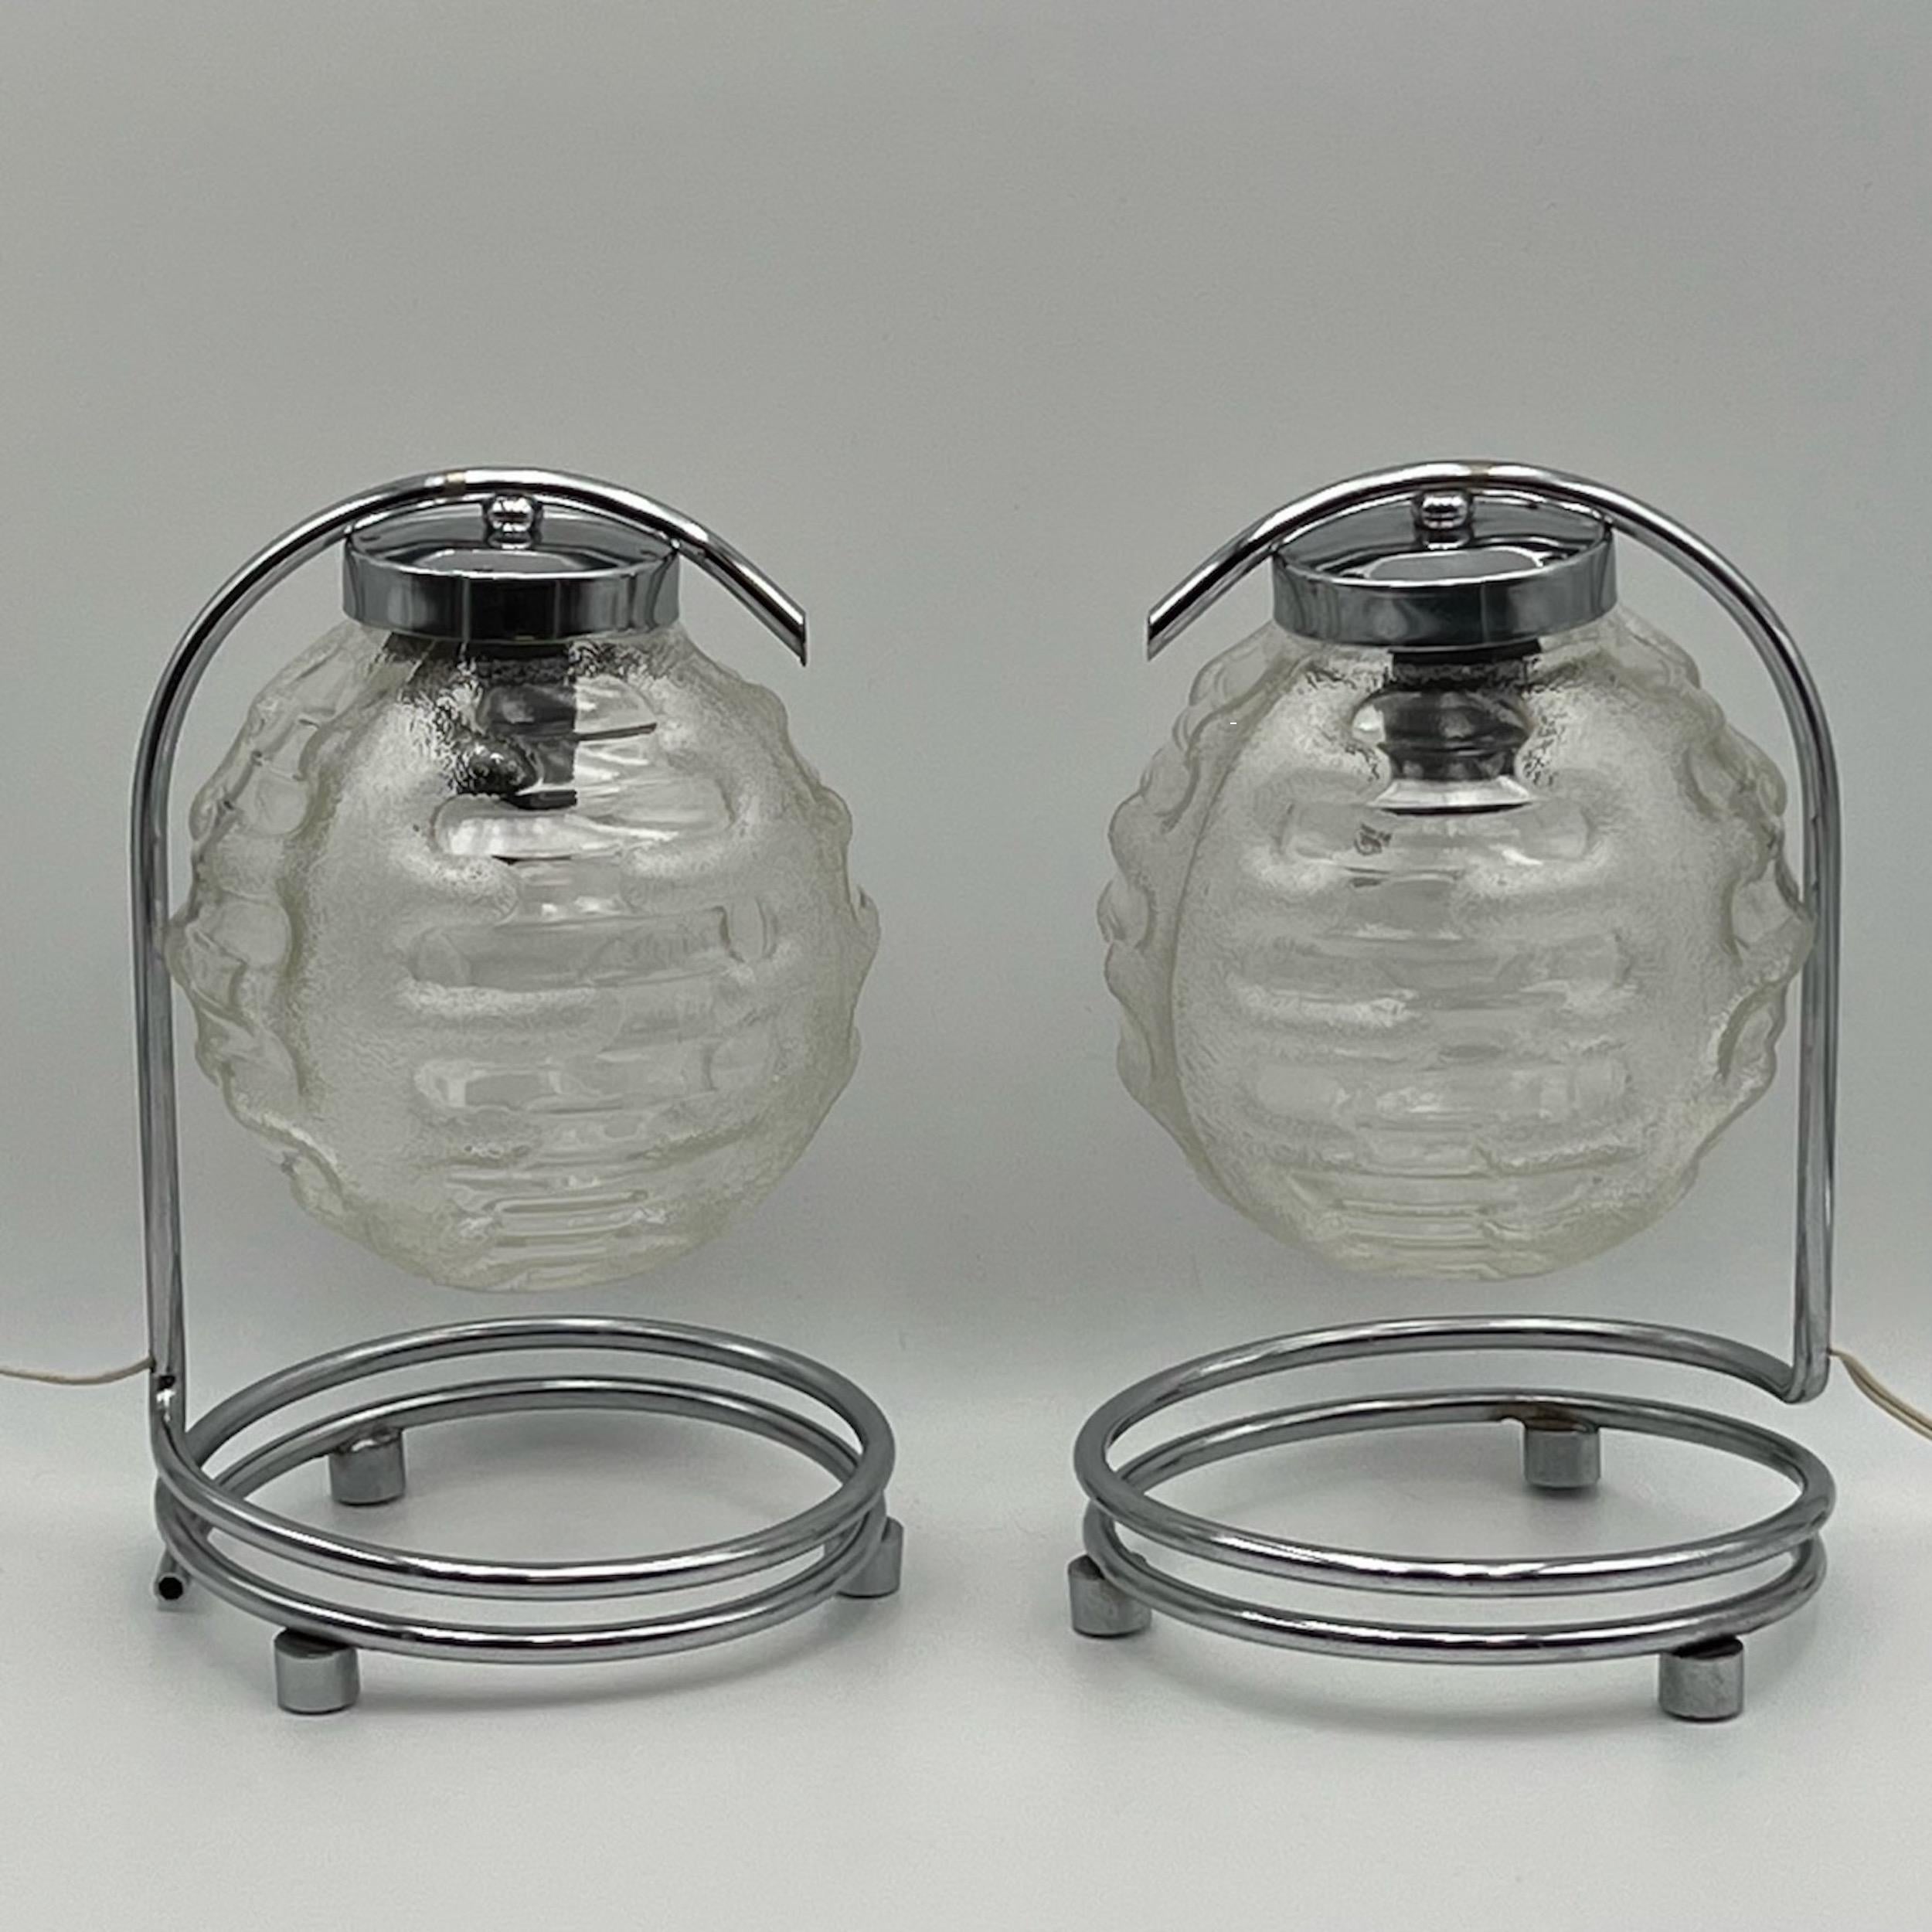 Metal Chromed Lamps with Patterned Glass Globes by Richard Essig, 1970s, Set of 2 For Sale